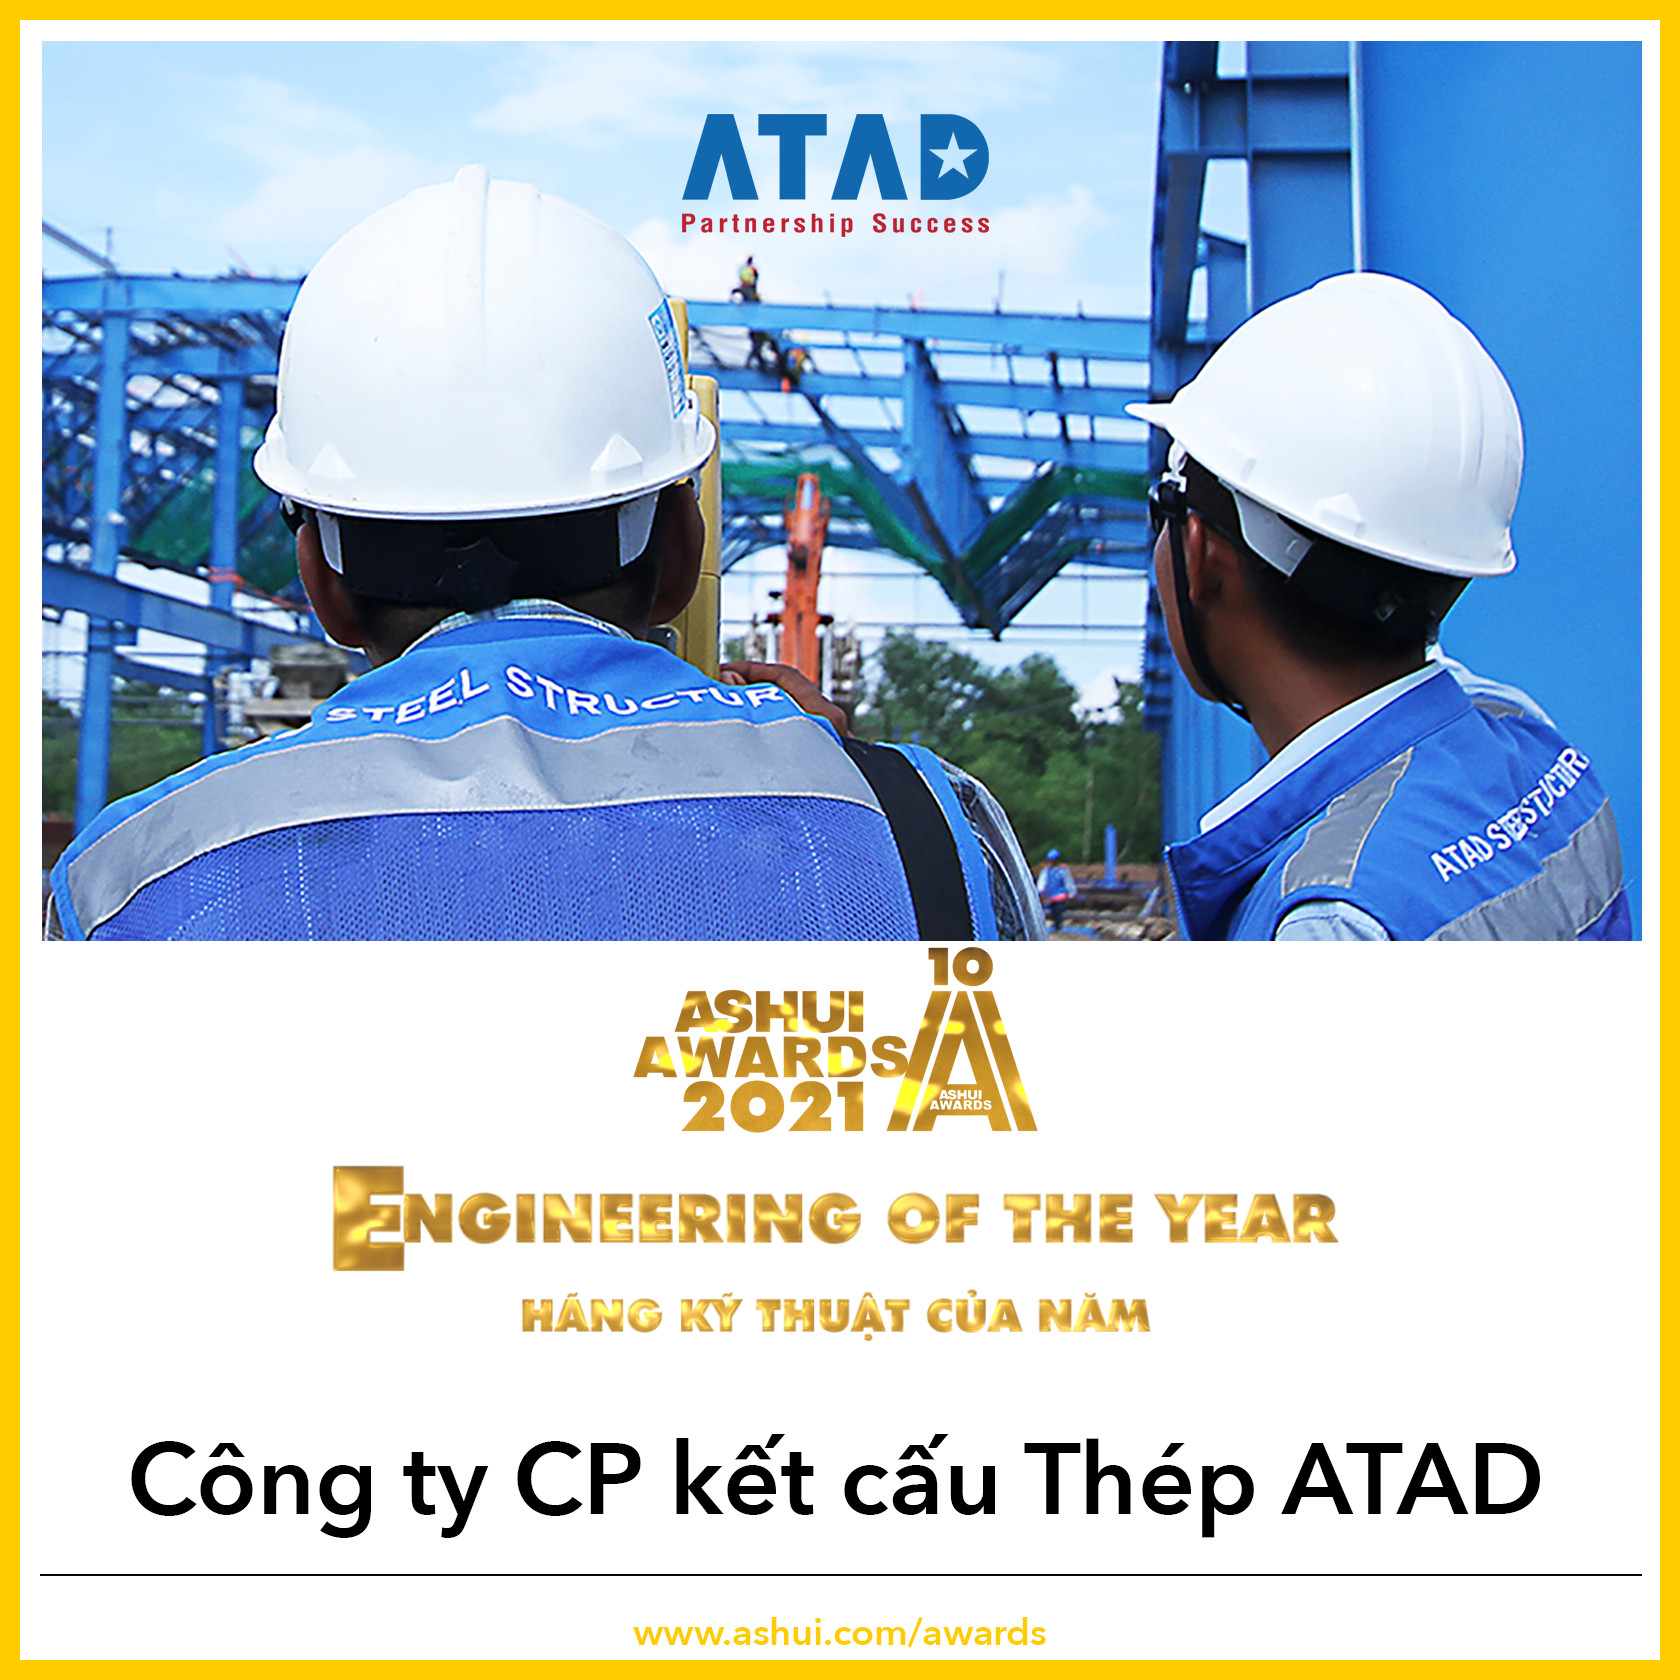 ATAD was honored as "Engineering of the Year"